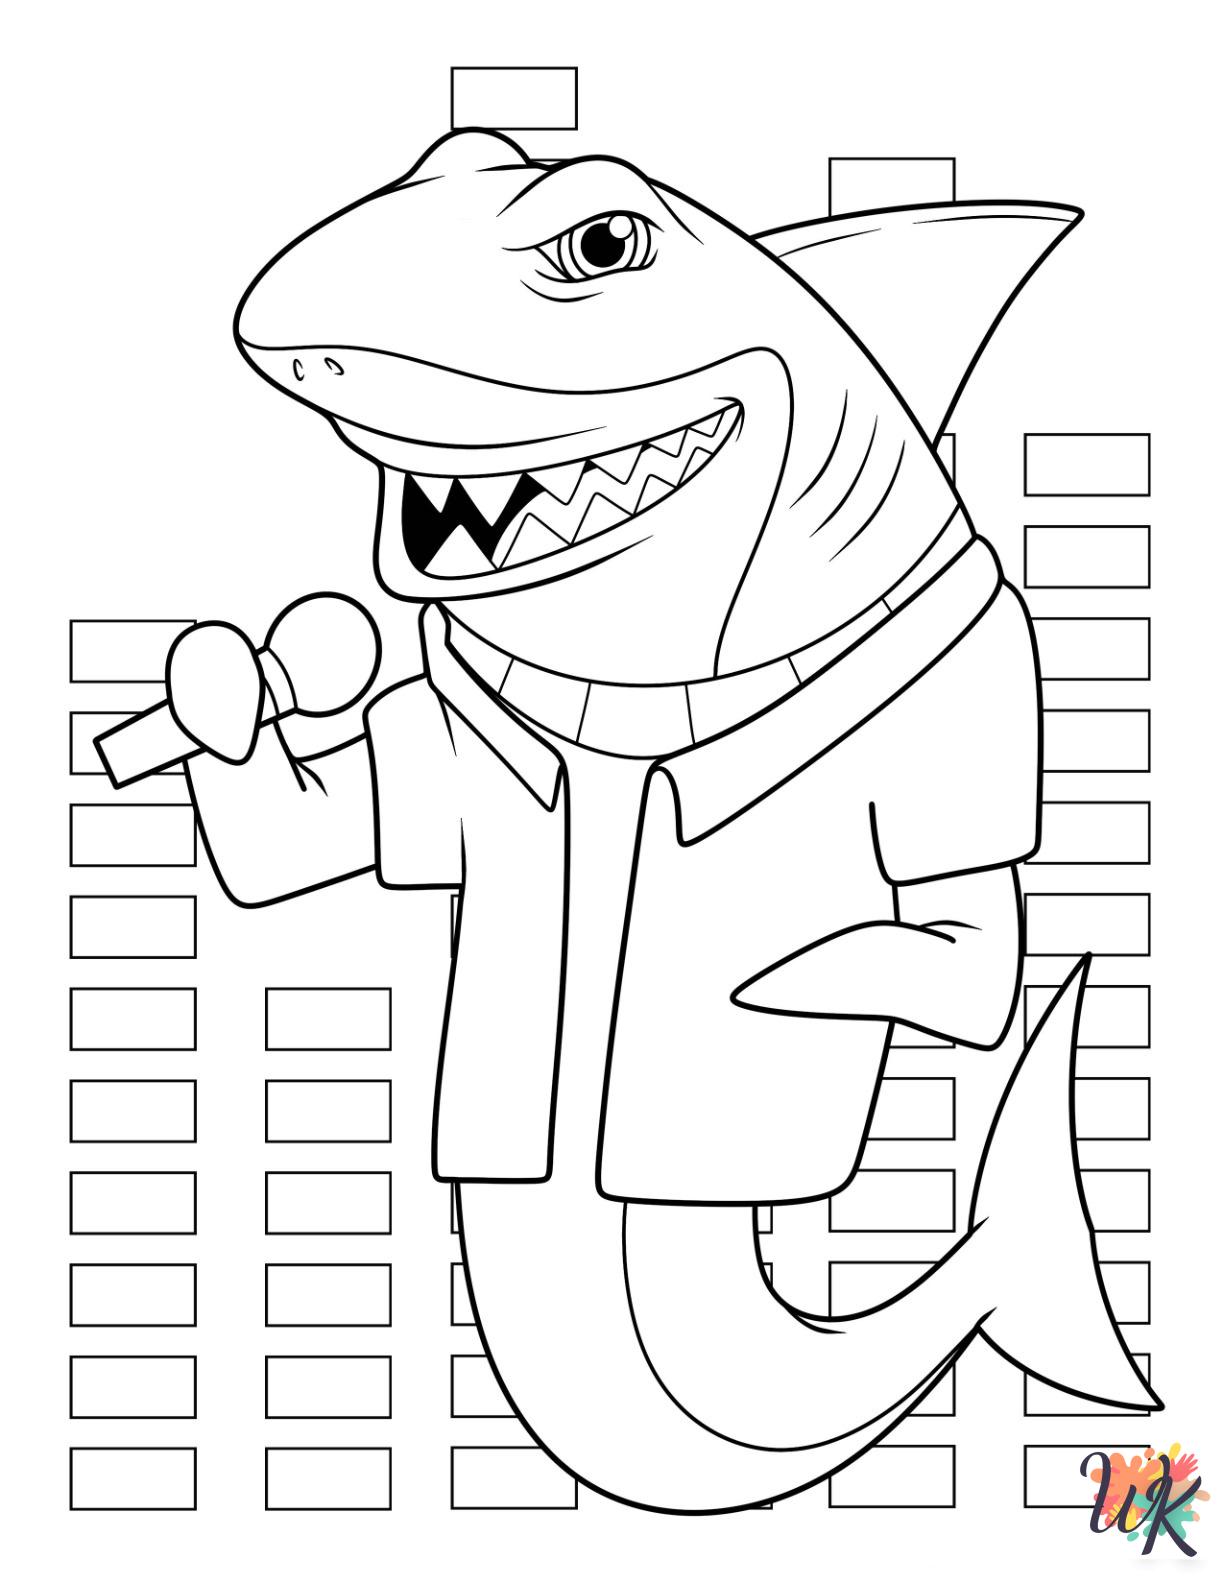 Shark coloring pages free printable